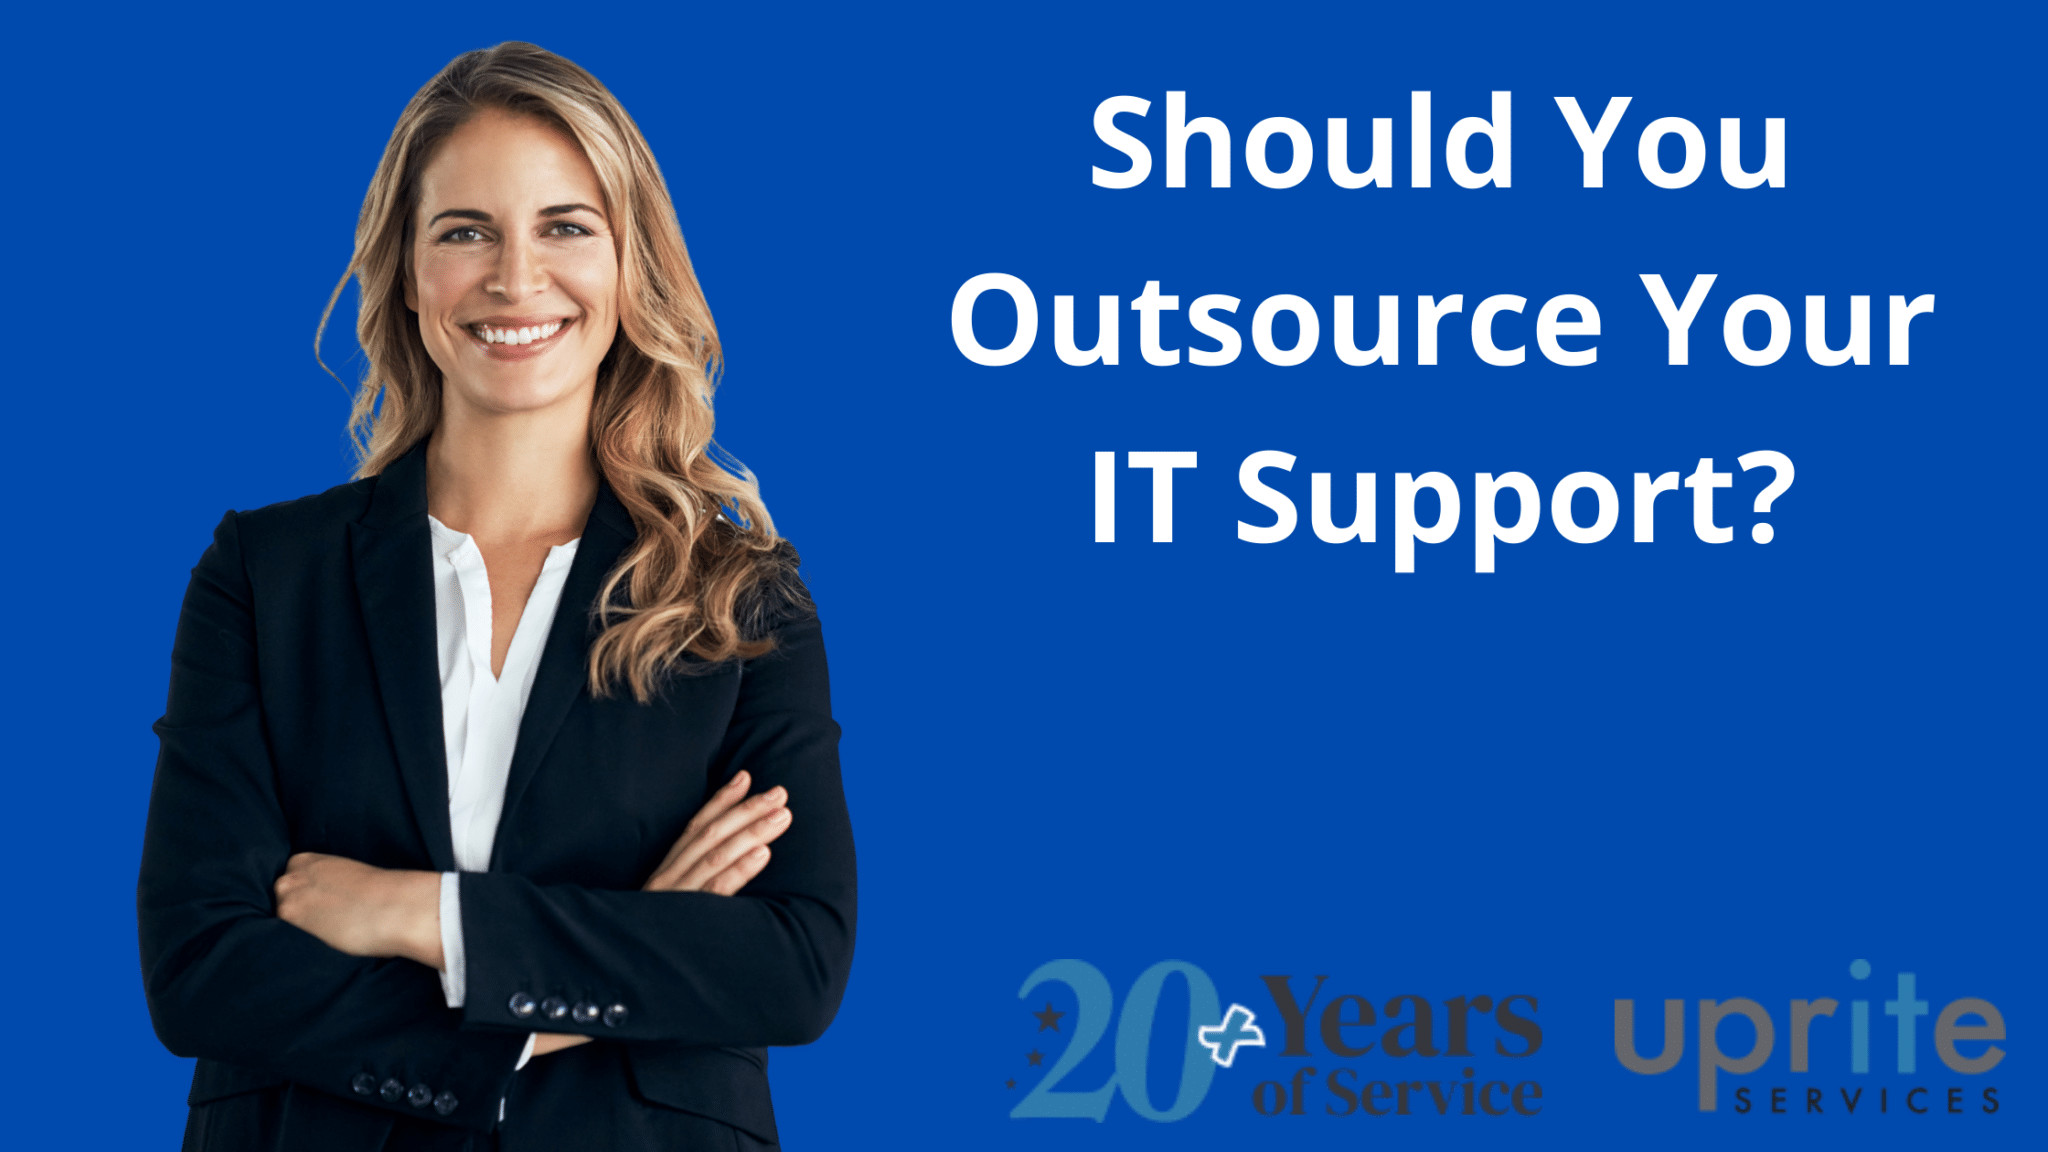 Should You Outsource Your IT Support?